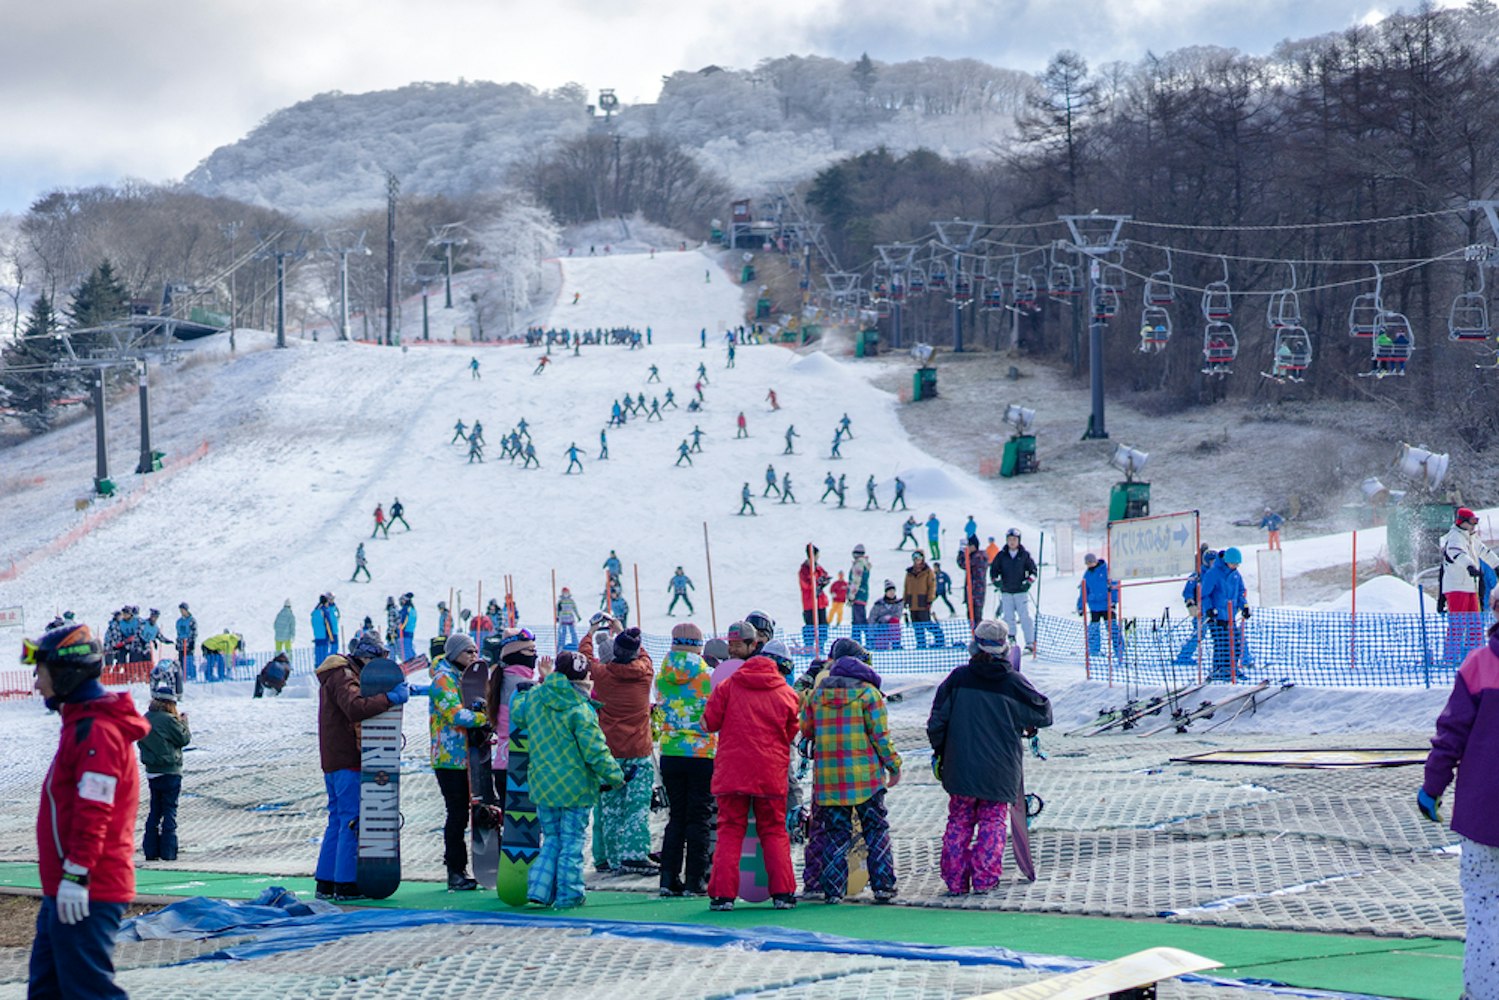 People Enjoy on the Snow and Ski Slopes